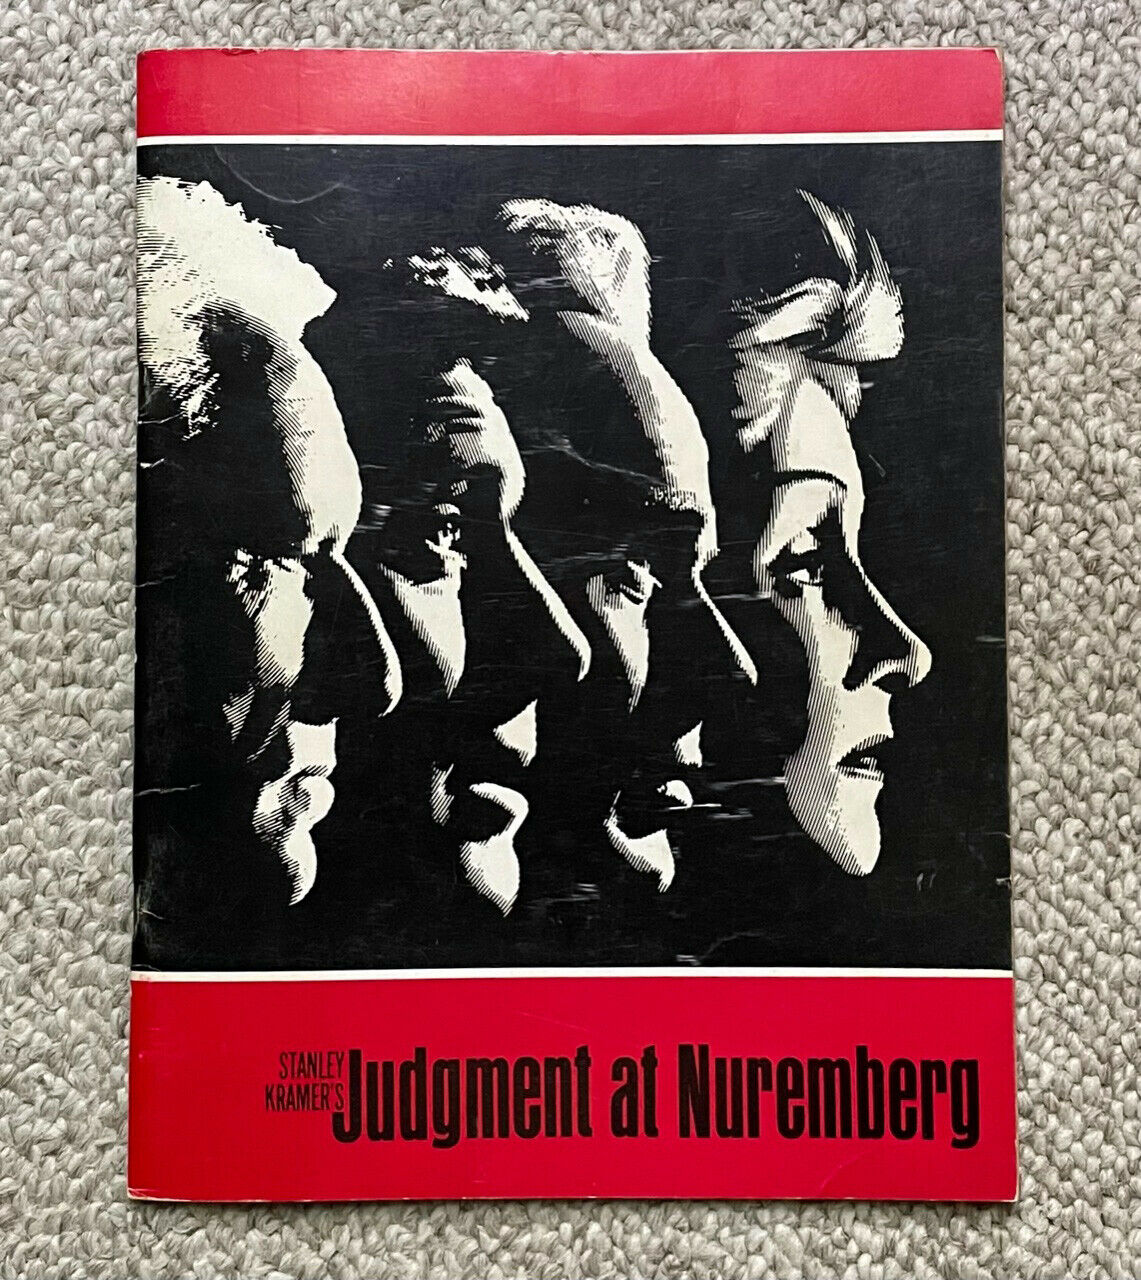 Judgment At Nuremberg Program From 1961 - Spencer Tracy, Judy Garland, More